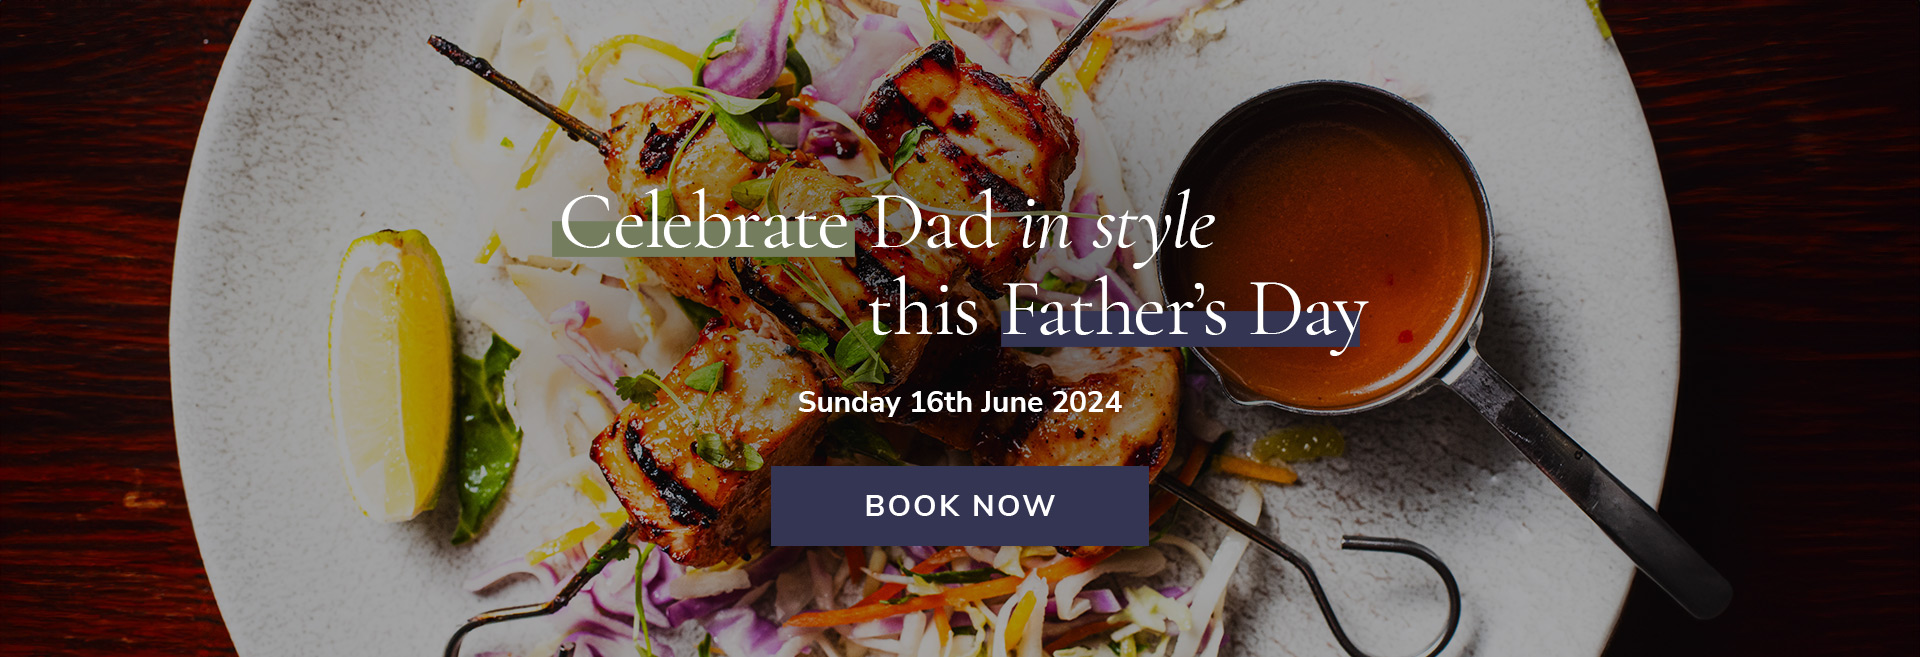 Father's Day at The Lamb